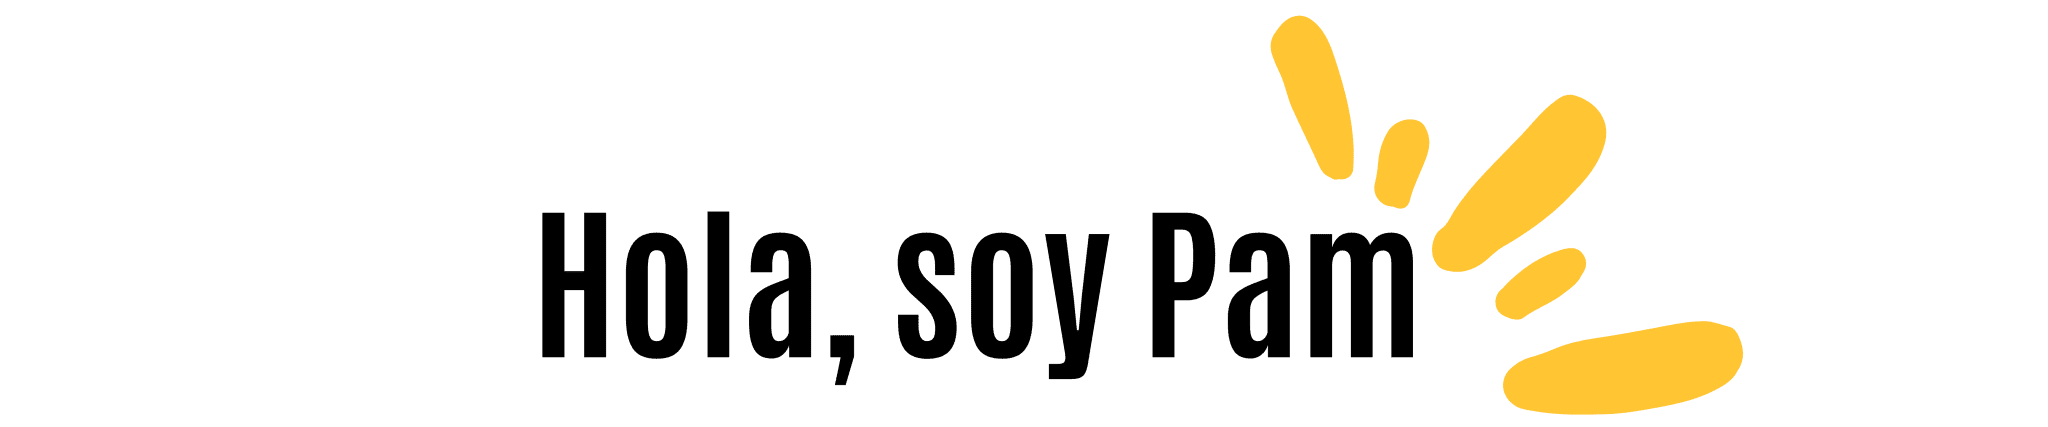 Banner hola soy pam